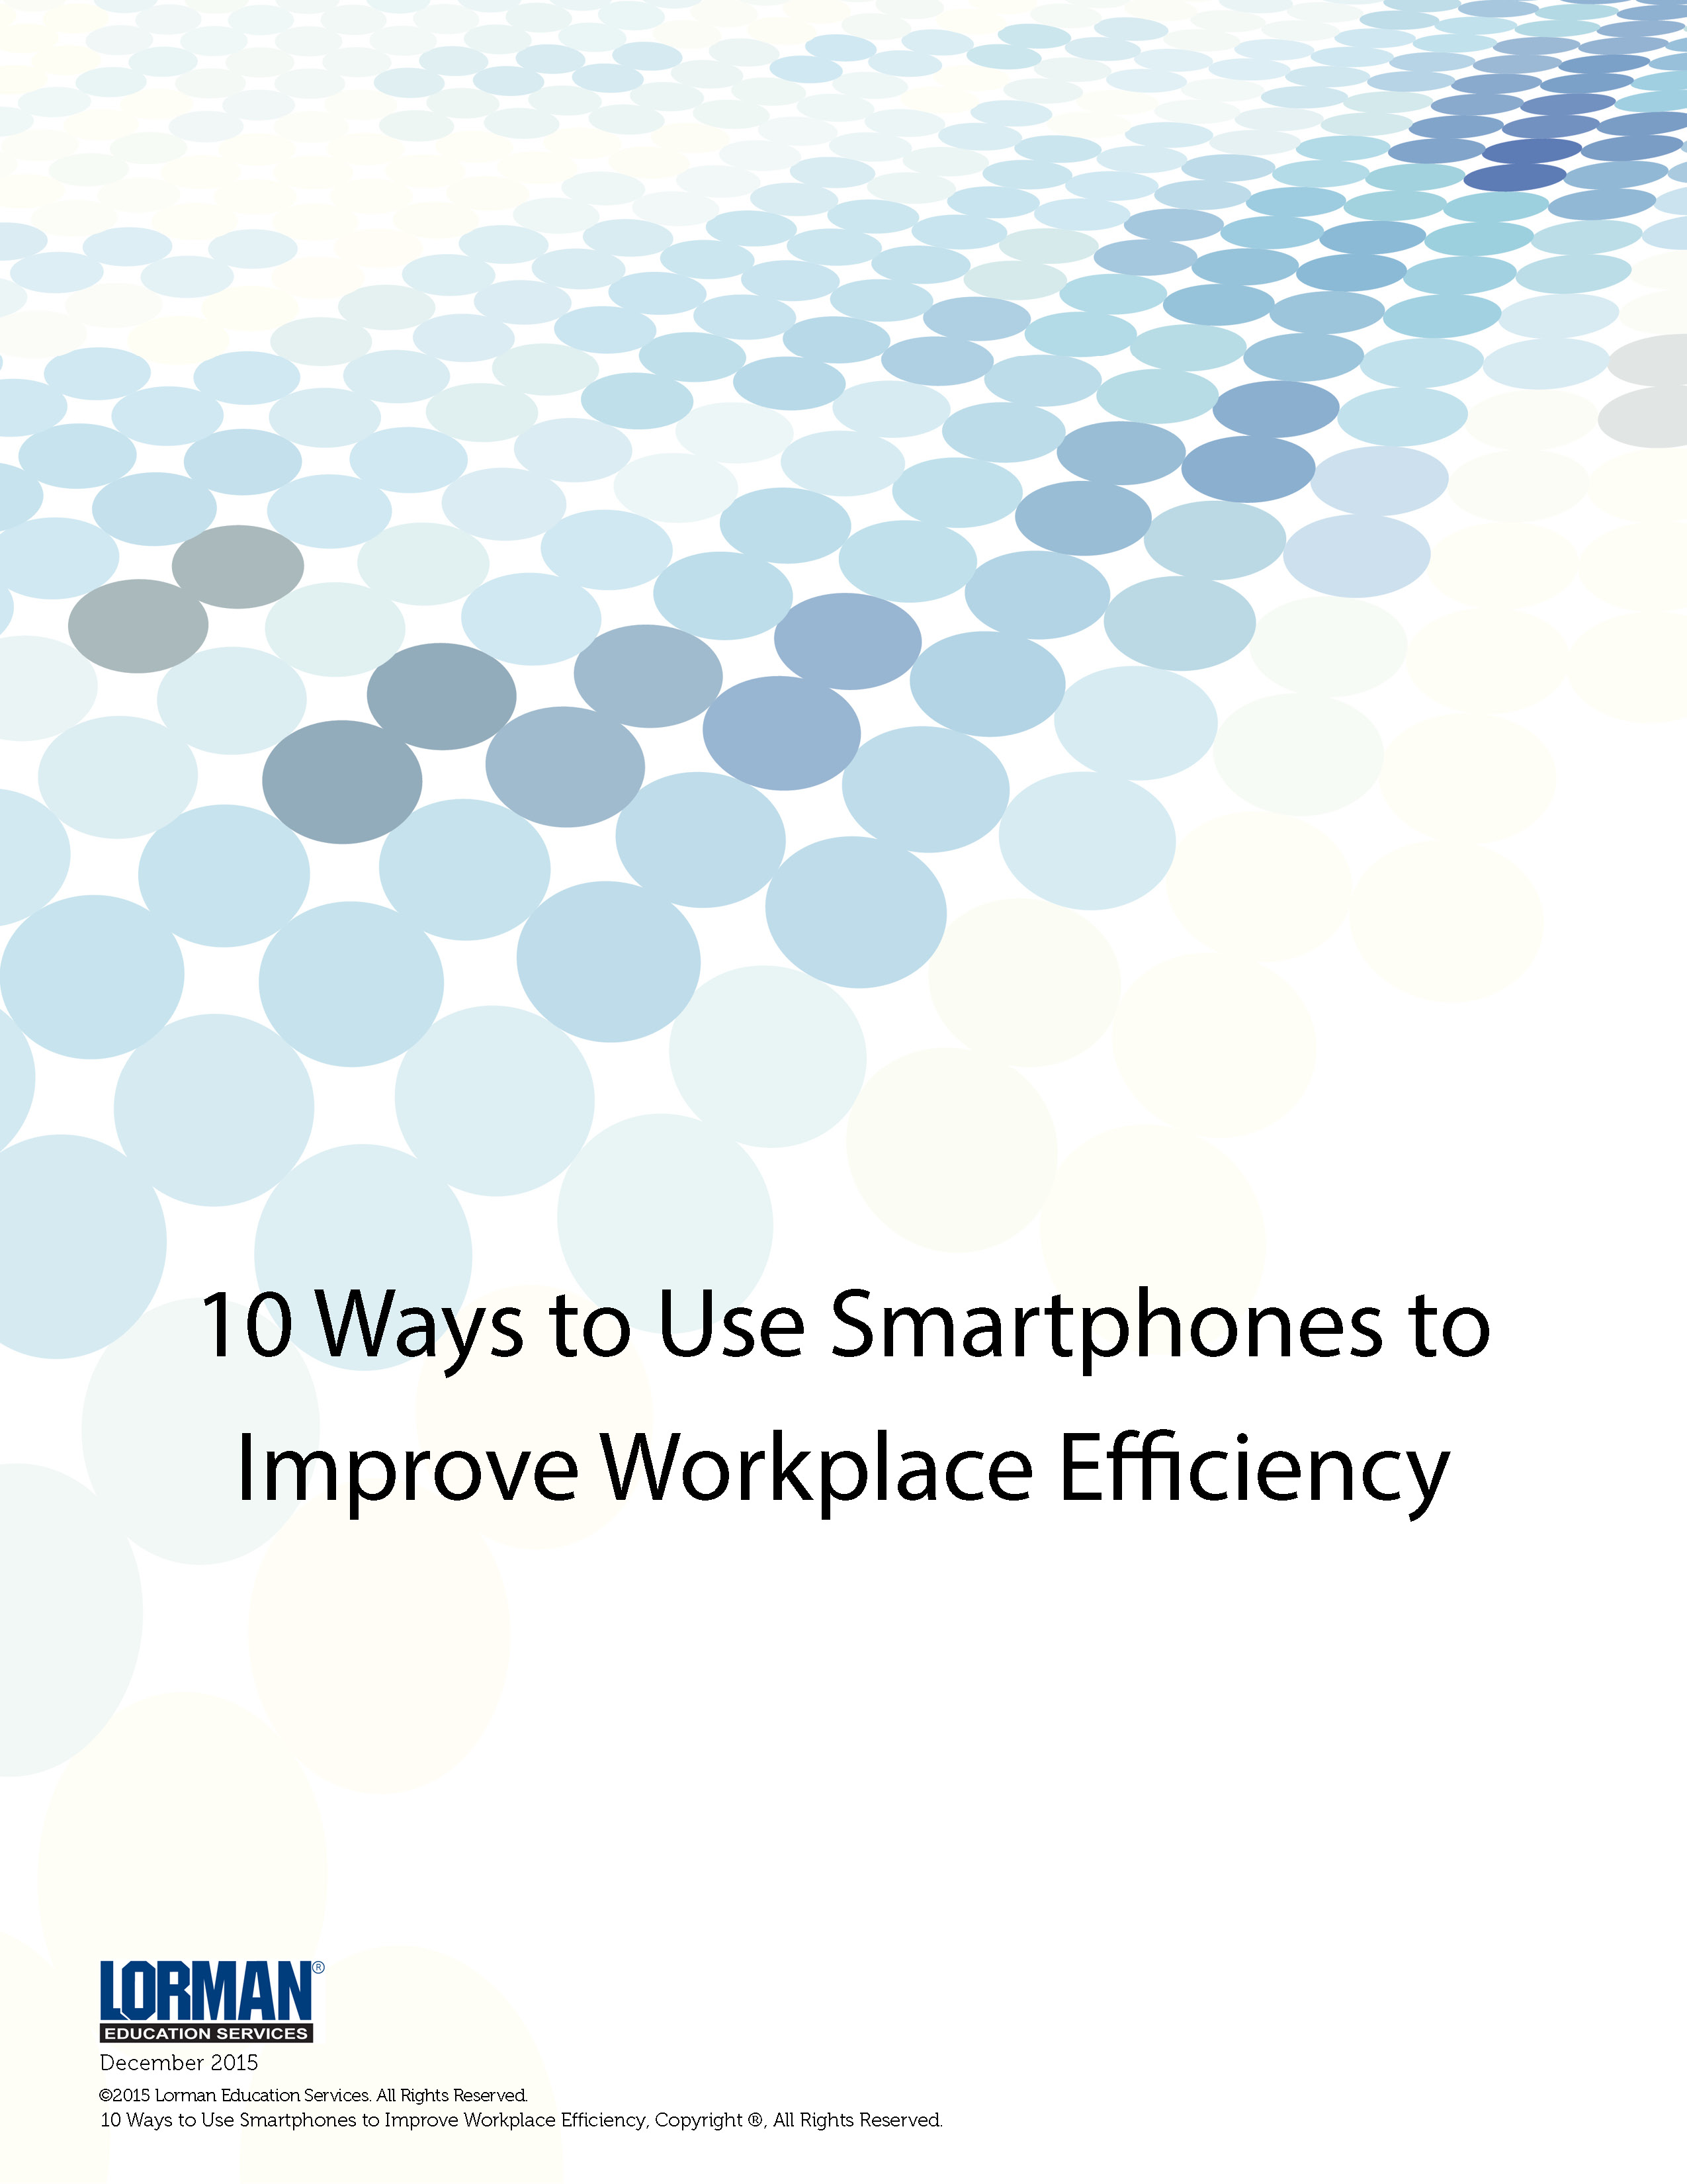 10 Ways to Use Smartphones to Improve Workplace Efficiency